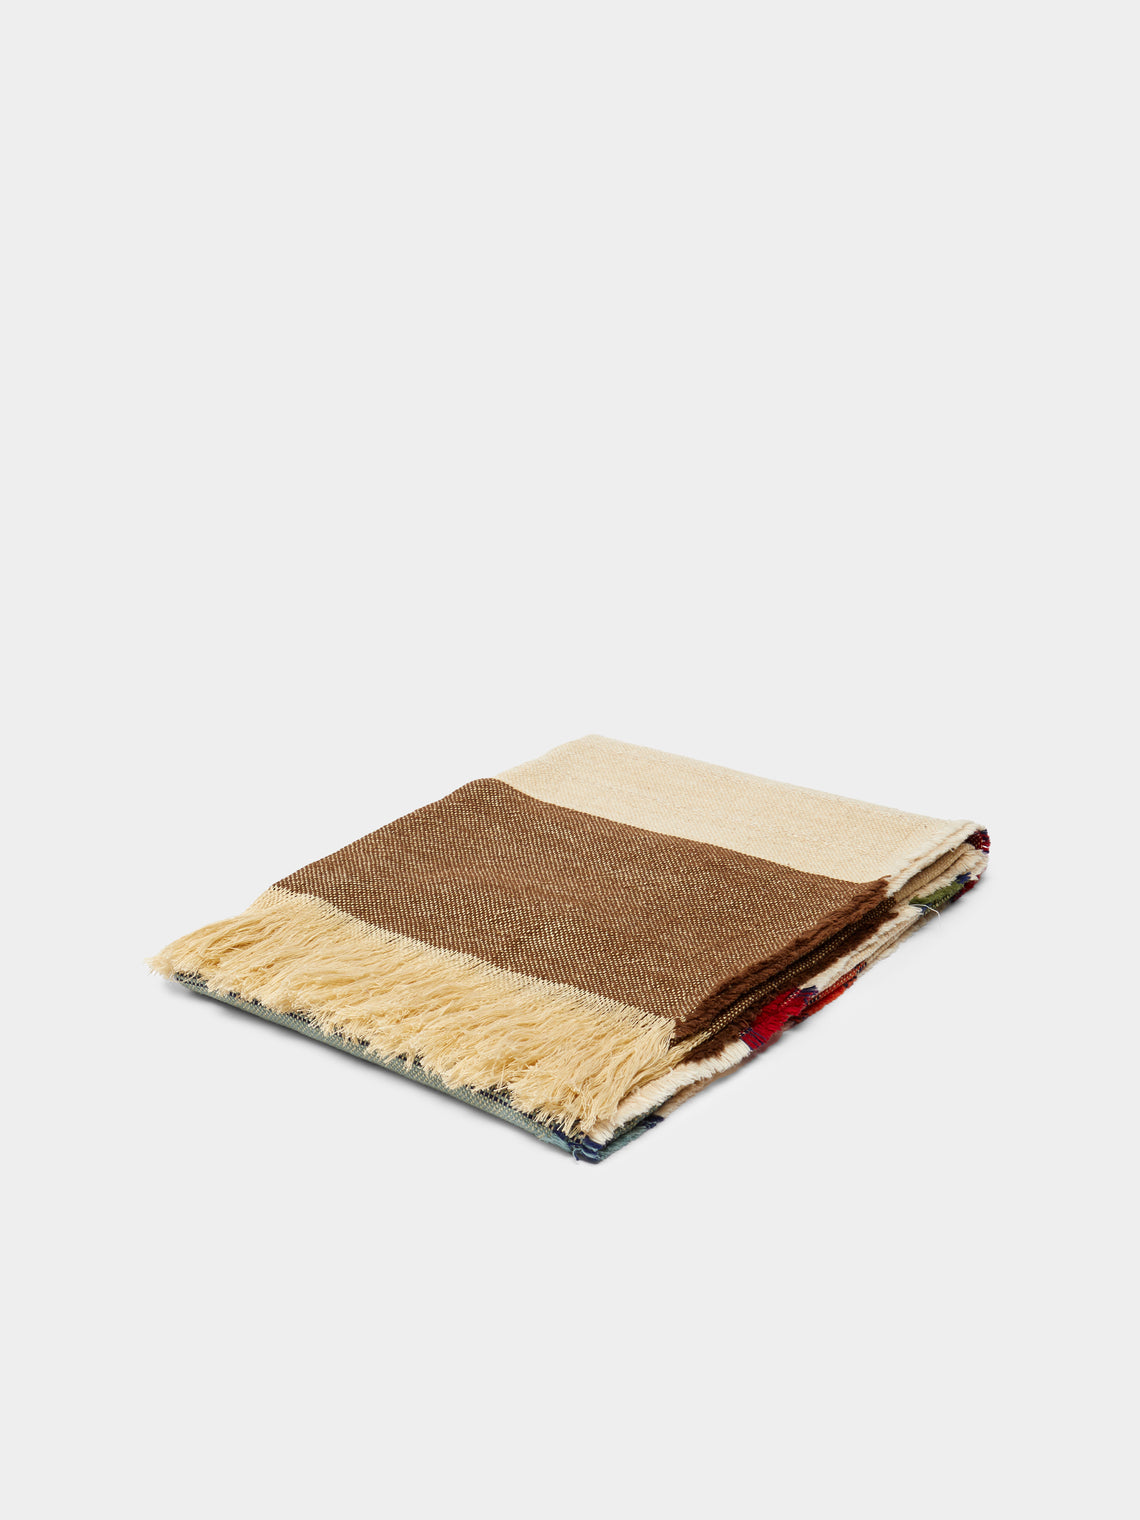 The House of Lyria - Forestiere Handwoven Linen and Cotton Blanket -  - ABASK